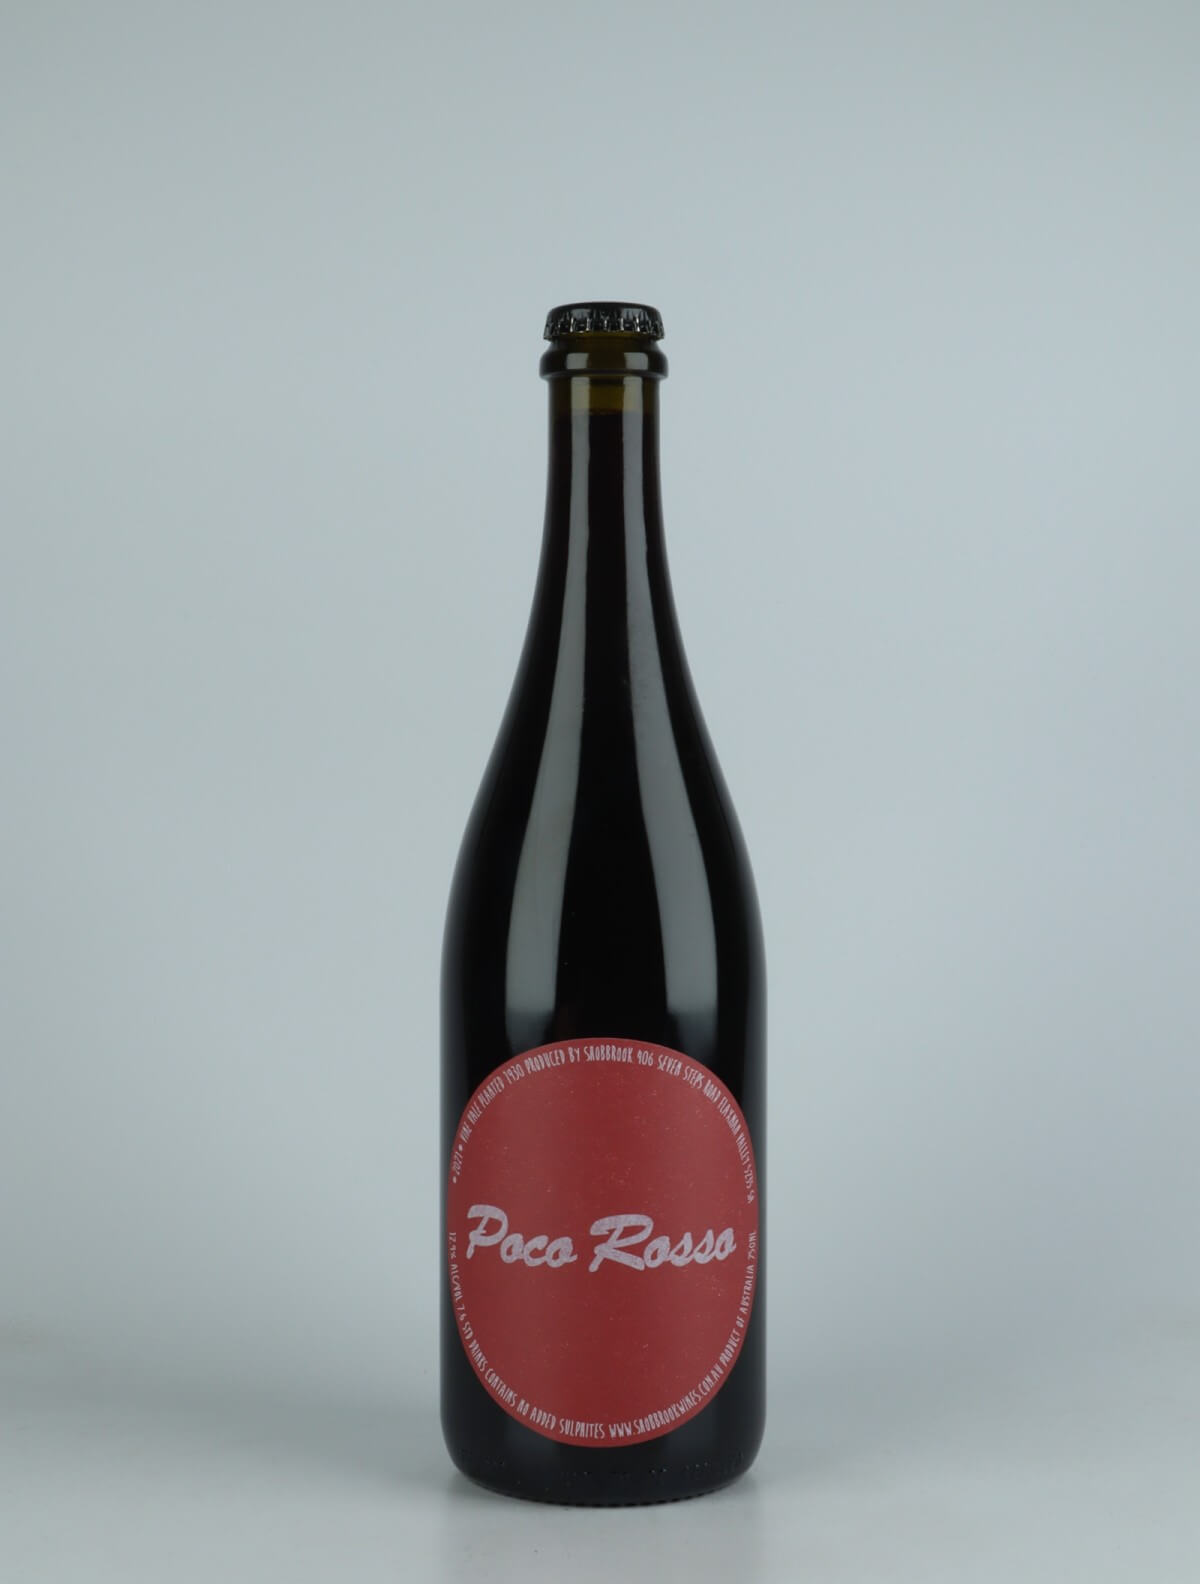 A bottle 2021 Poco Rosso Red wine from Tom Shobbrook, Adelaide Hills in Australia